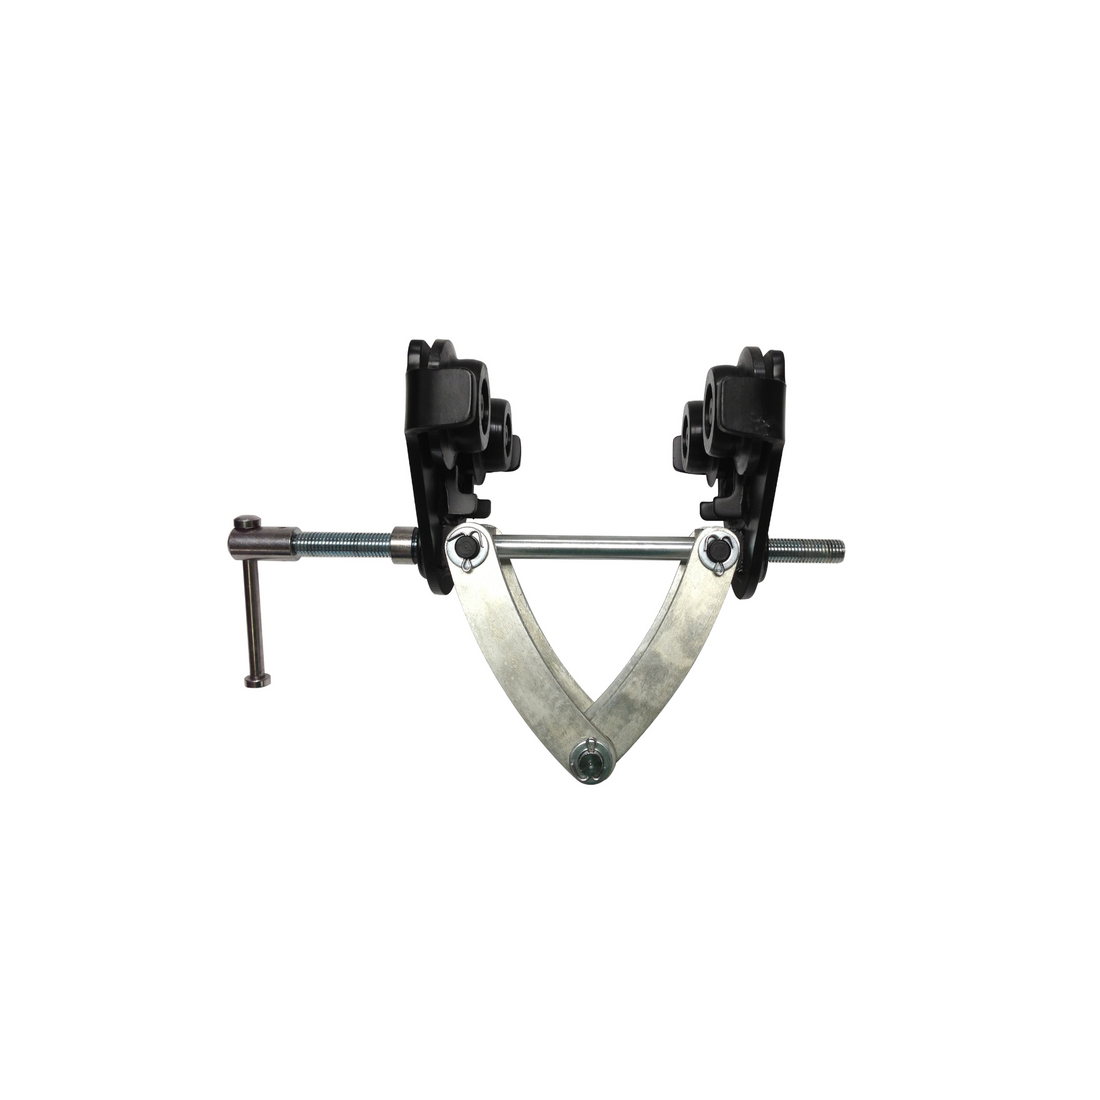 CMCO CTP Adjustable Trolley Clamp